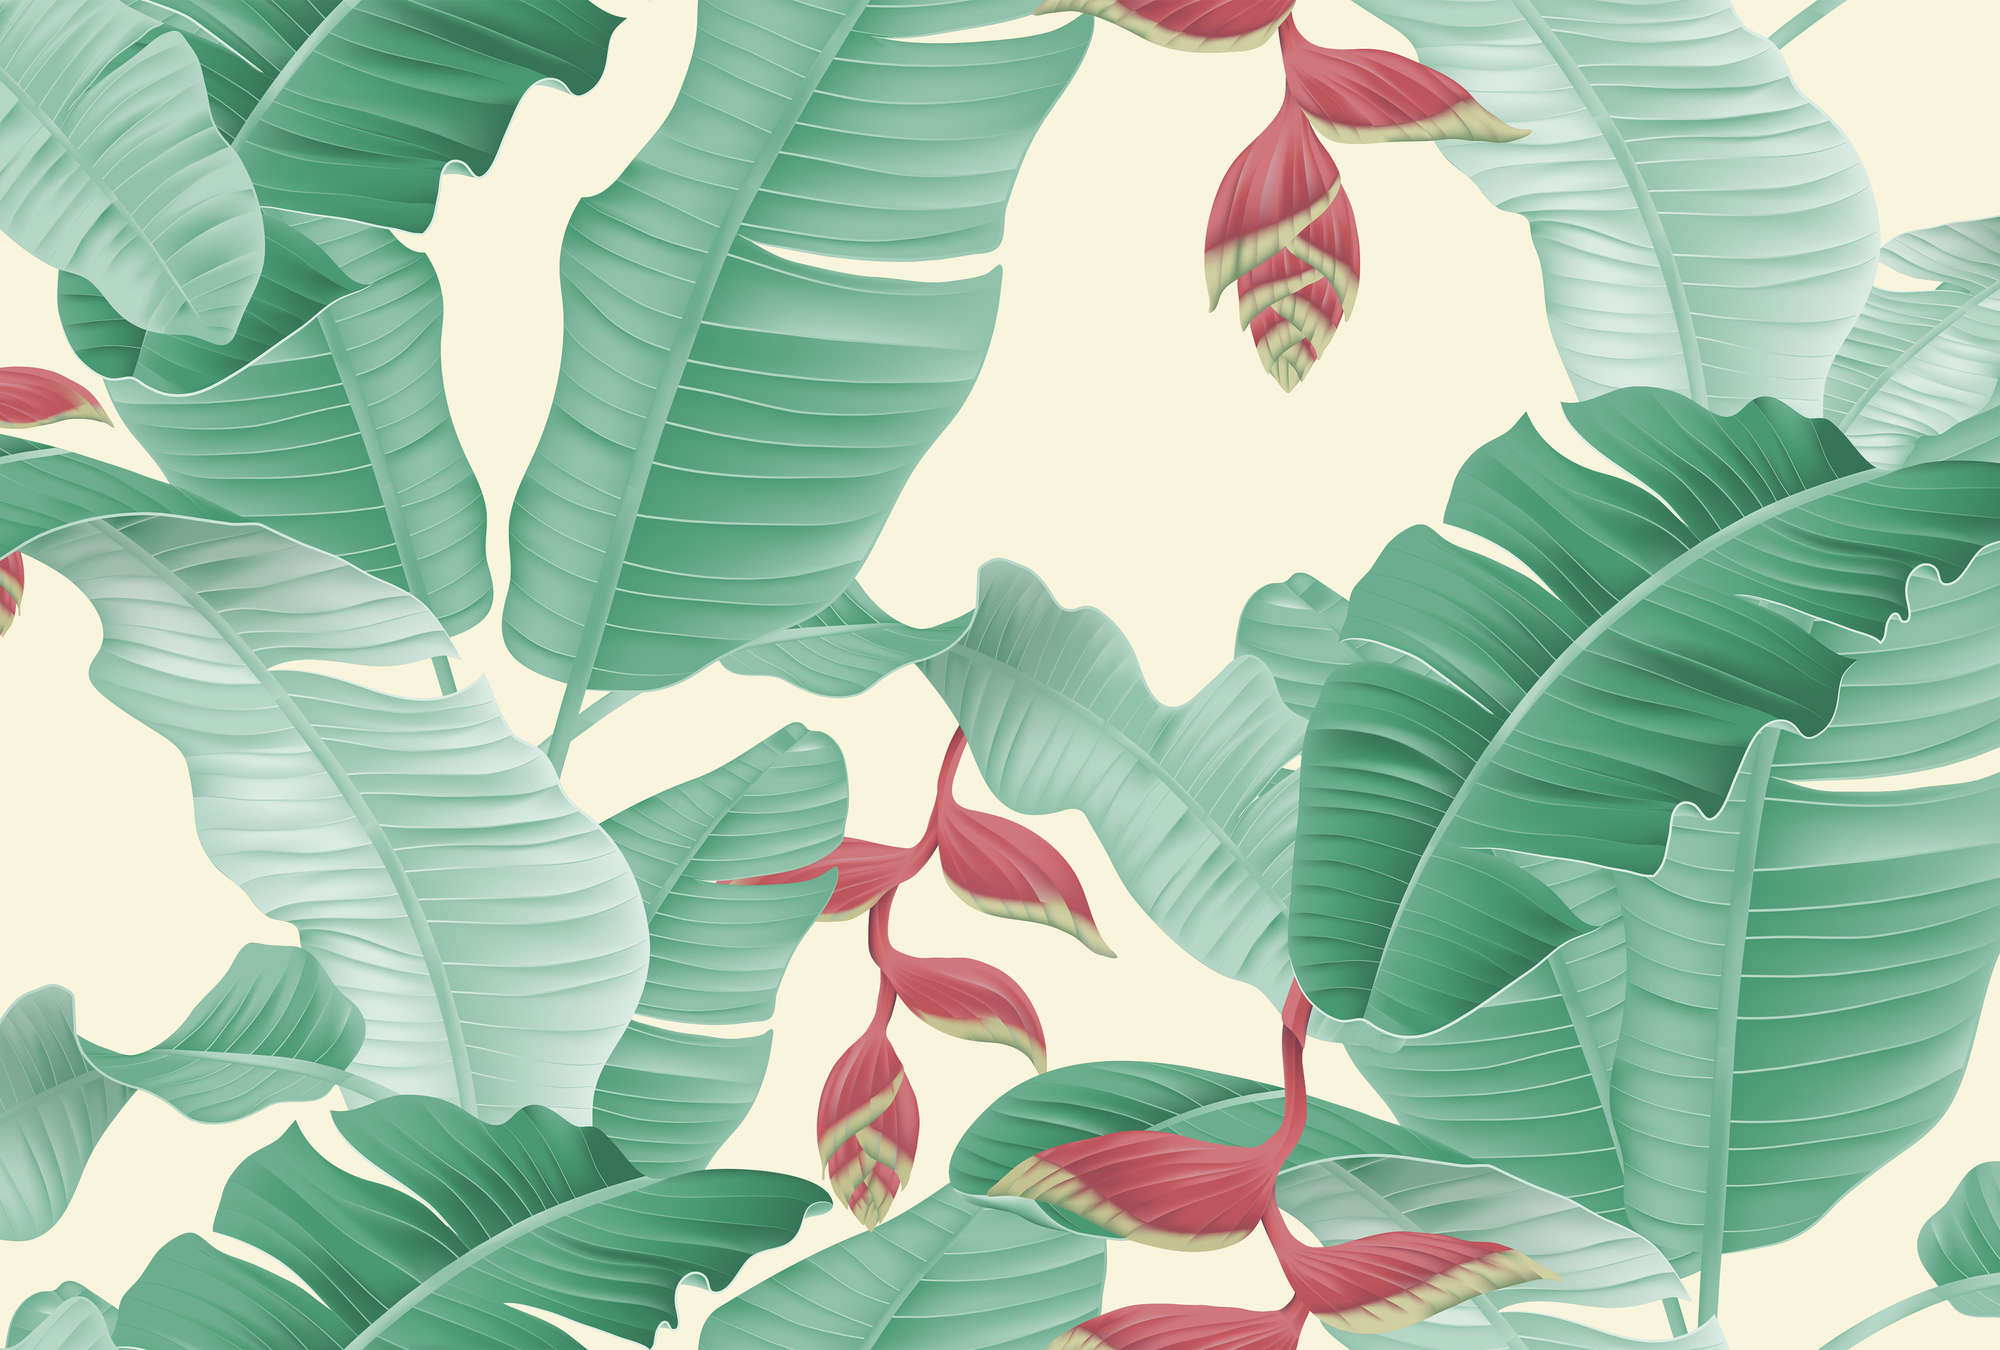             Palm leaves graphic style mural - Green, Yellow
        